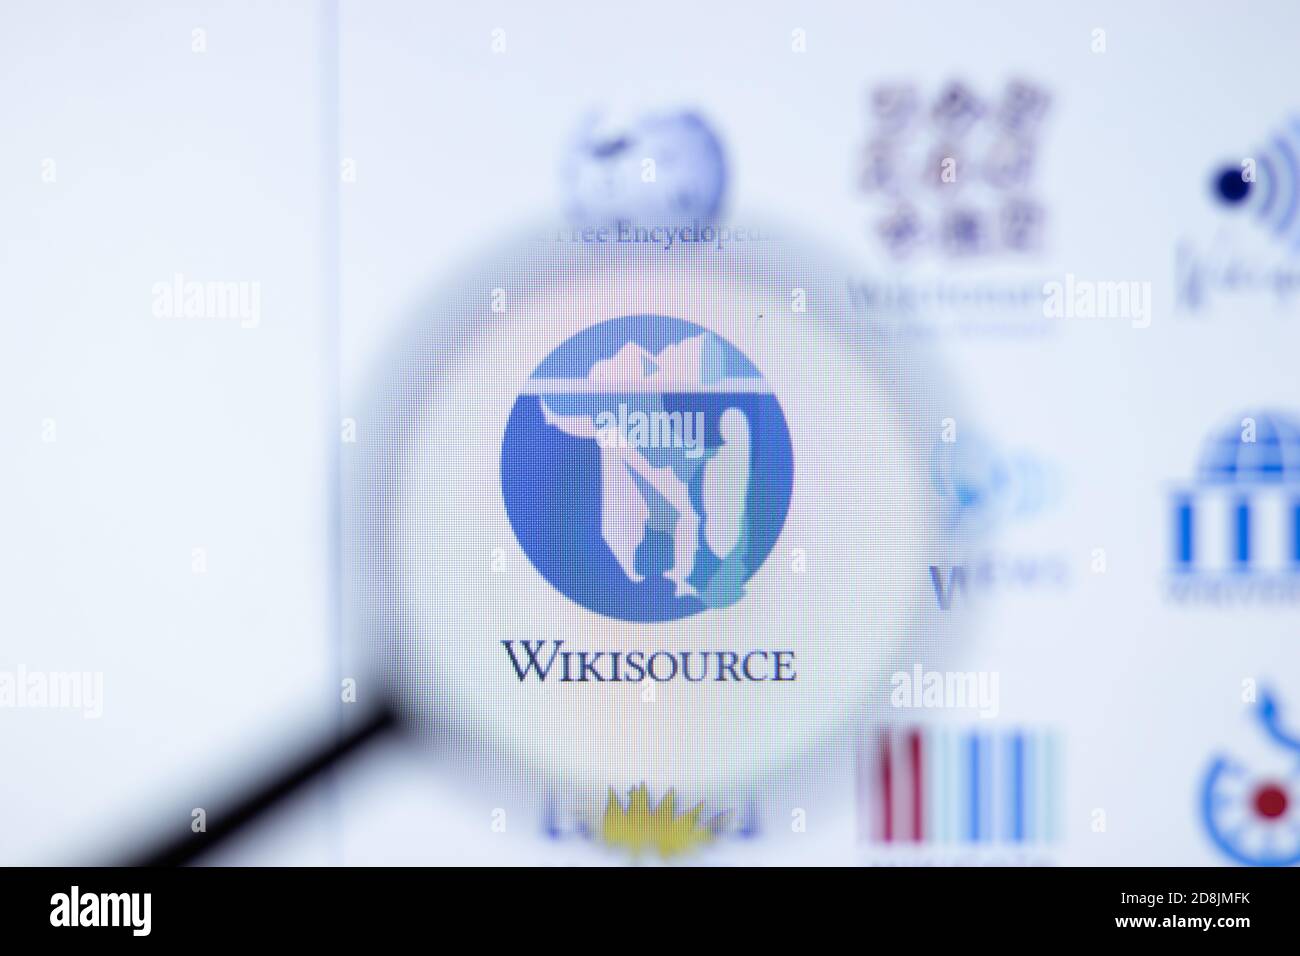 New York, USA - 29 September 2020: Wikisource company website with logo close up, Illustrative Editorial Stock Photo